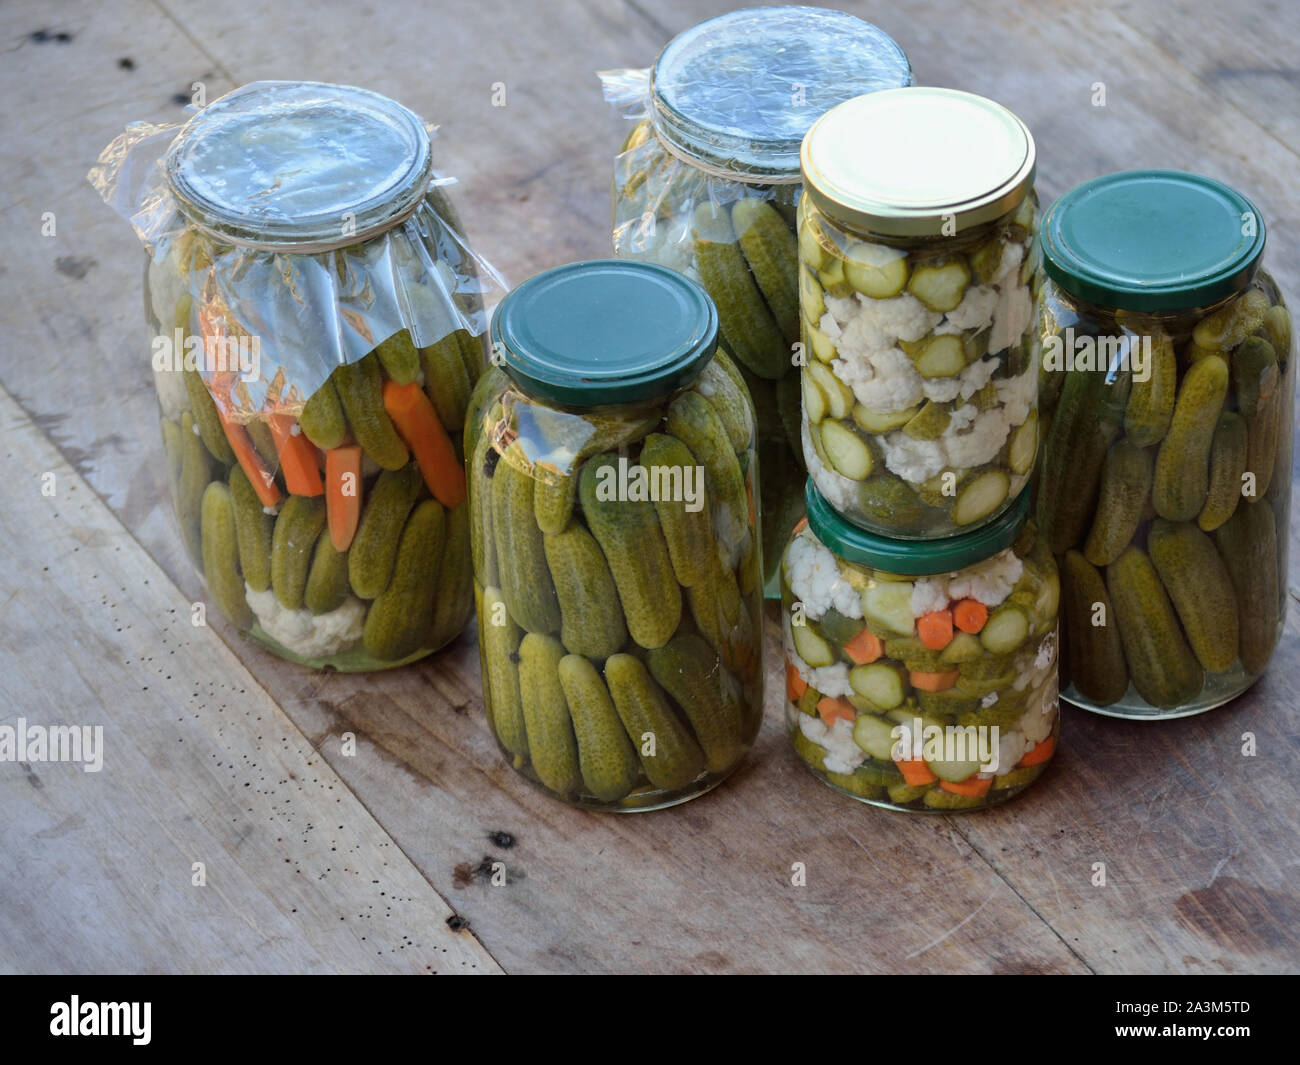 Homemade pickles, fermented vegetables. Pickled cucumber, cauliflower and carrot (Zimnica) Stock Photo